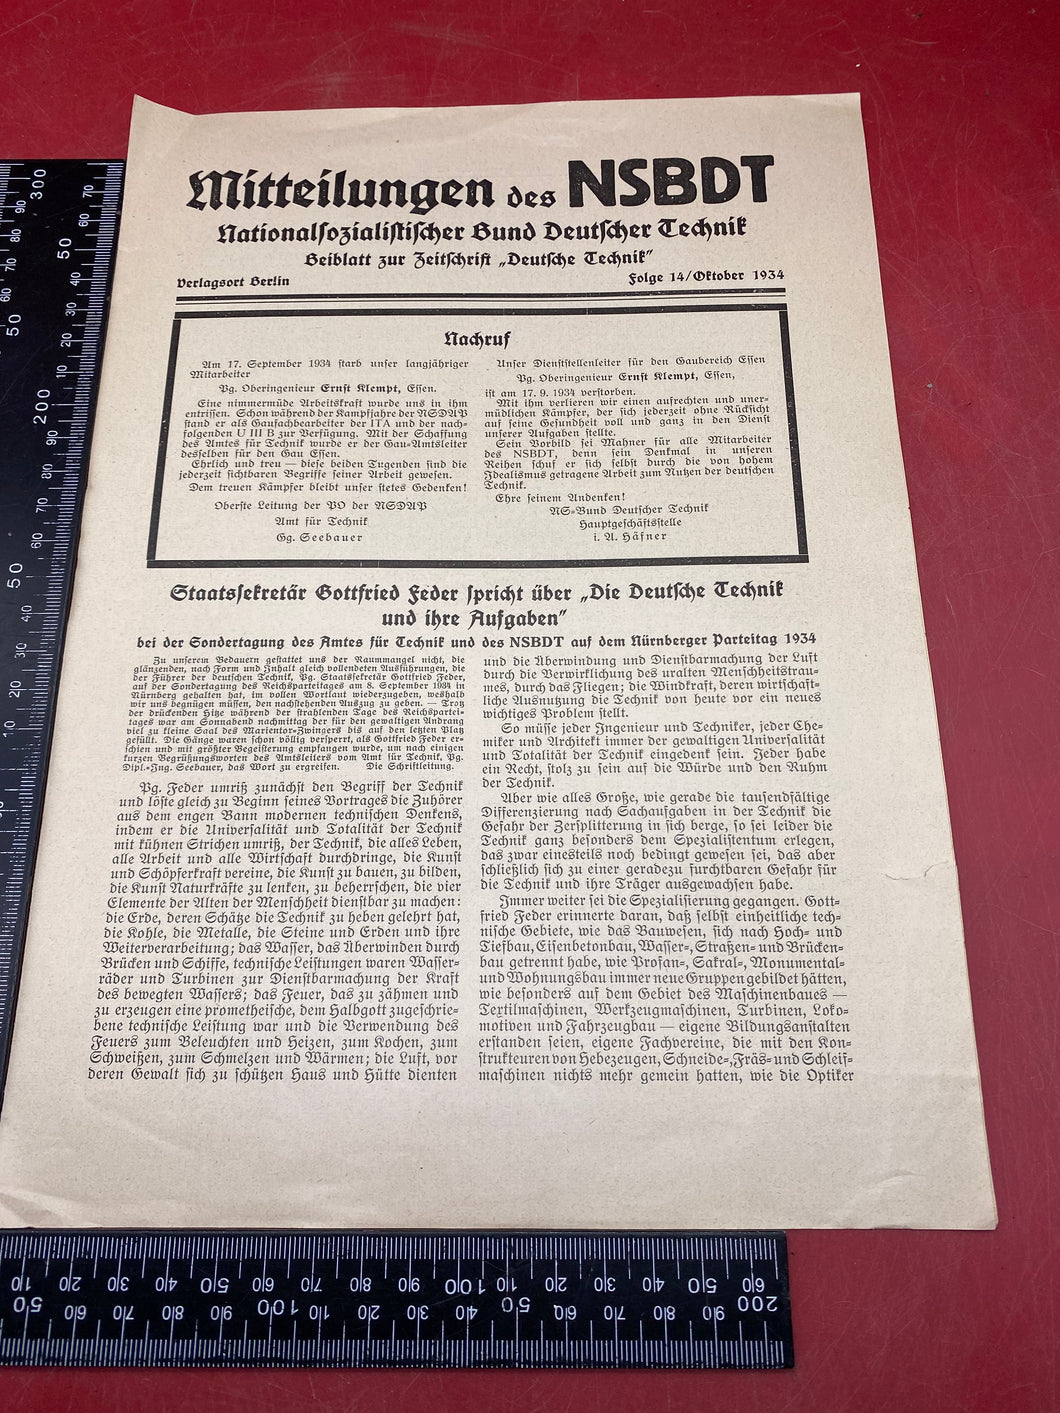 WW2 German NSBDT Leaflet - Possibly Technical Engineering Related.